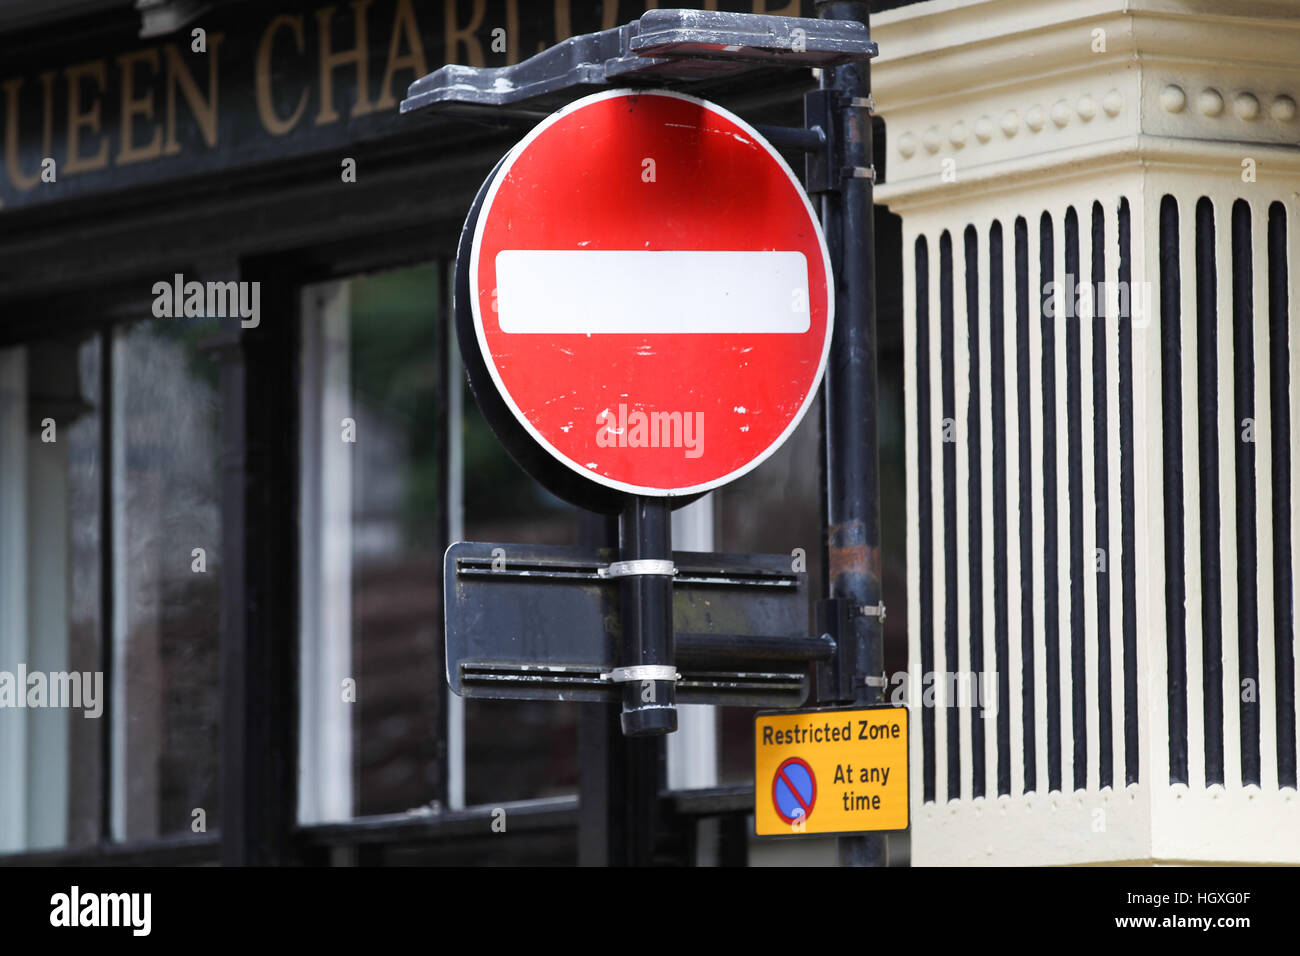 A no entry road sign is seen in England, UK, Europe. Stock Photo